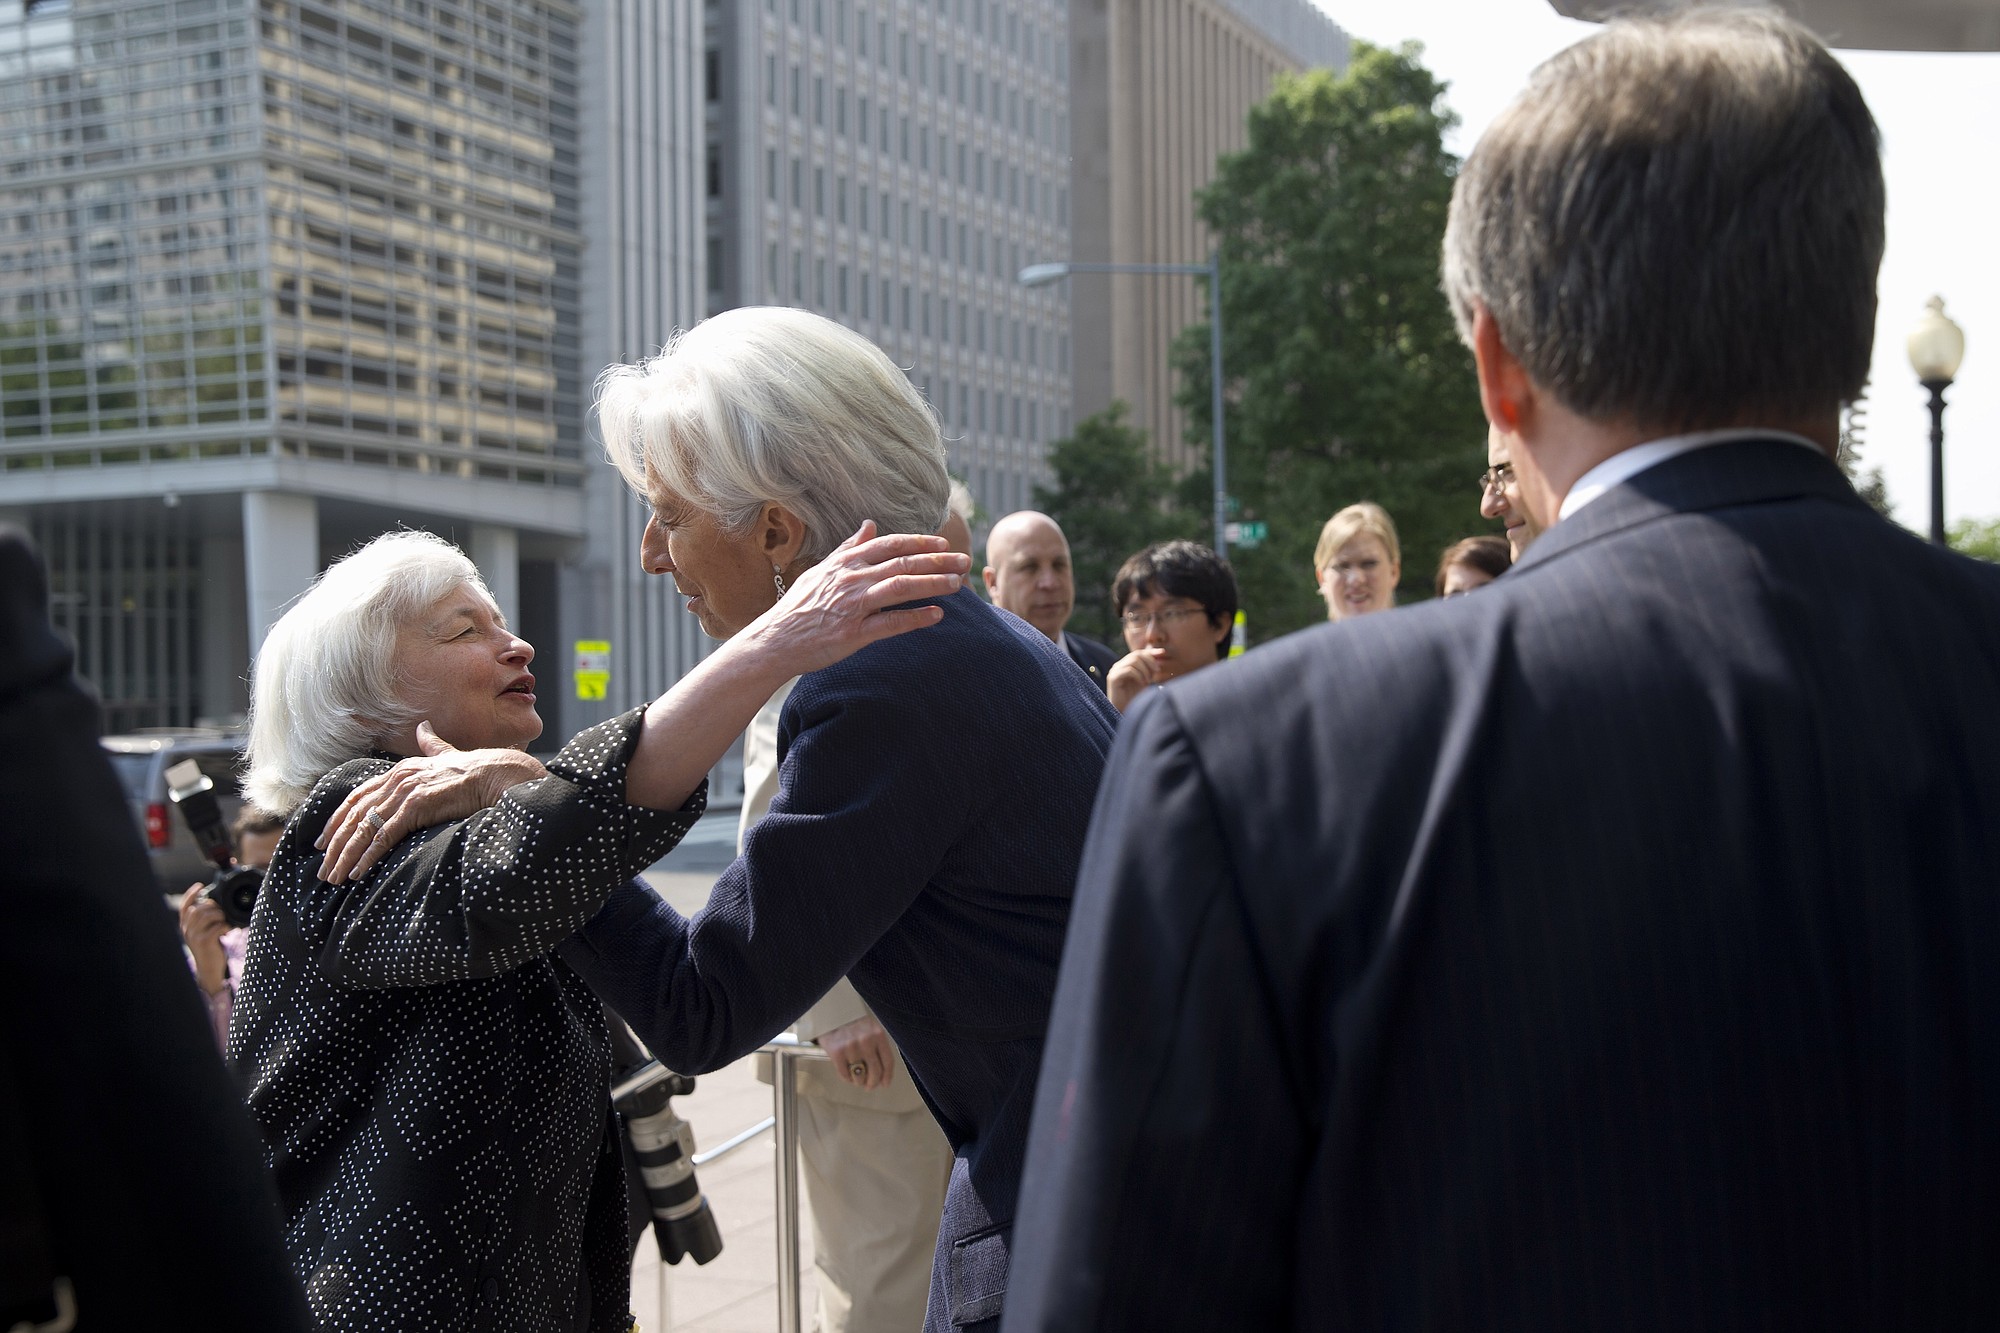 Security members watch as Federal Reserve Chair Janet Yellen, left, and International Monetary Fund Managing Director Christine Lagarde hug goodbye outside the IMF in Washington, on Wednesday after Yellen spoke at the Institute for New Economic Thinking Conference on Finance and Society.